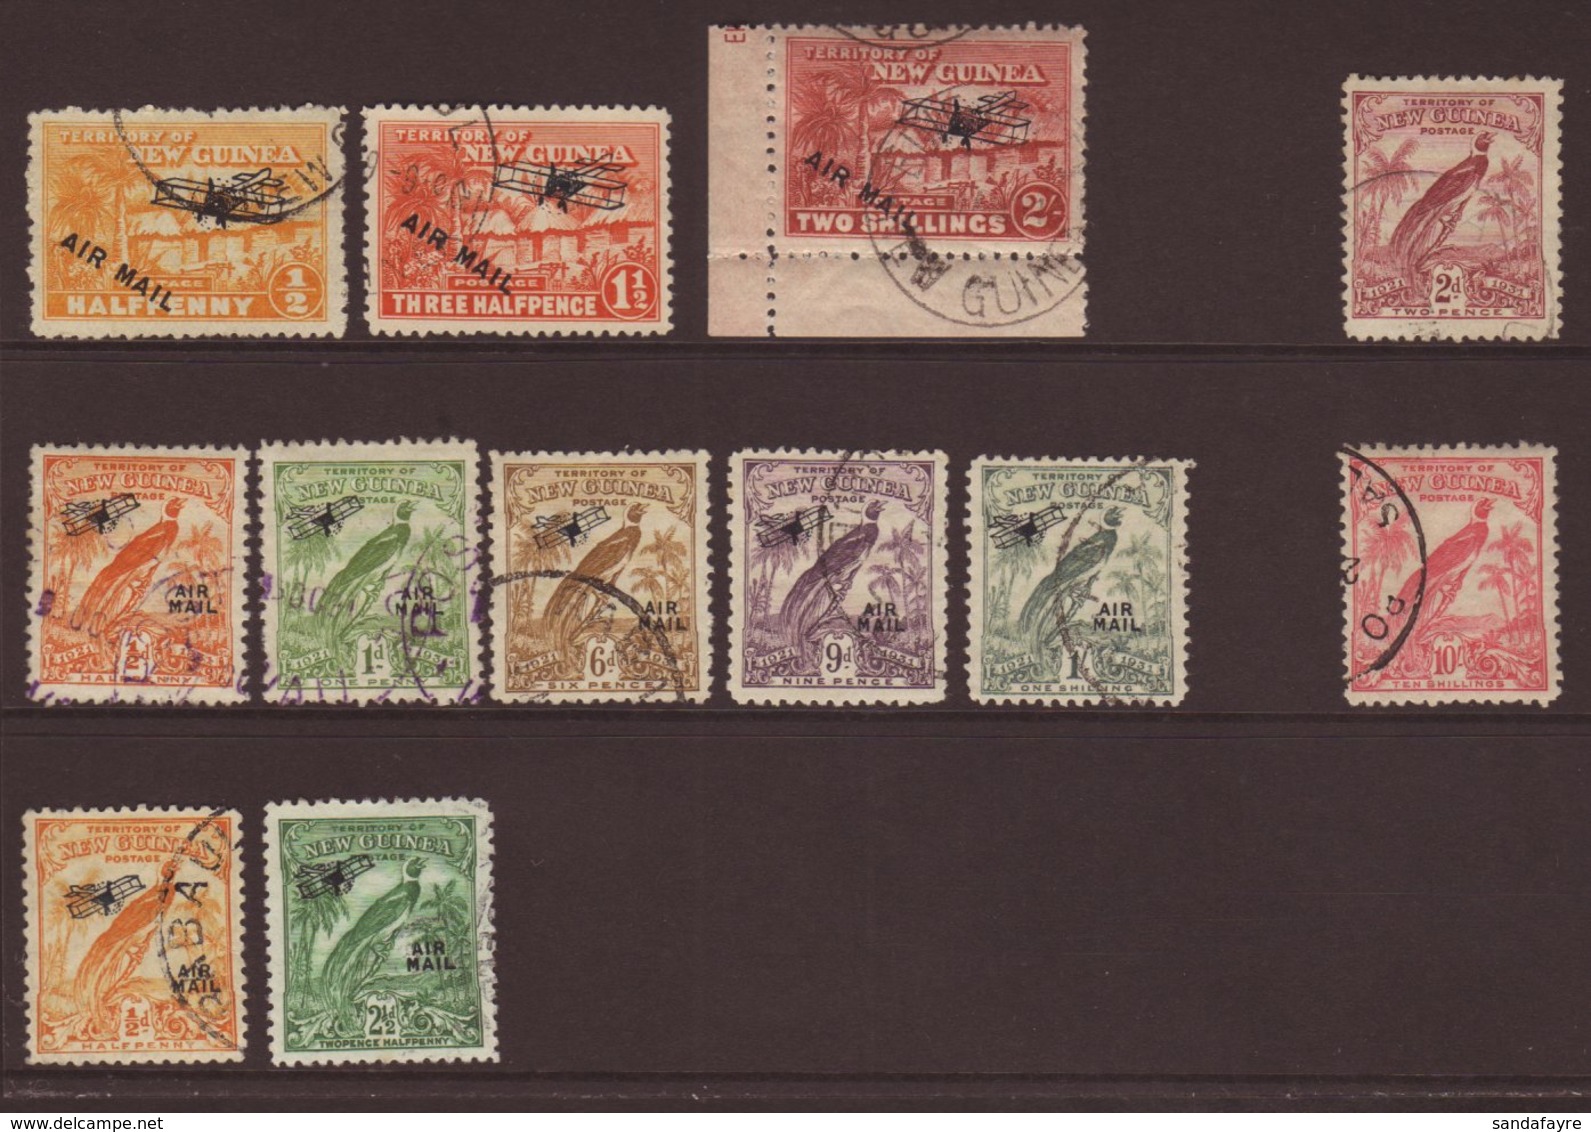 1925-34 A Useful Fine Used Range Incl. 1931 Village Air 2s, 1932-34 10s Etc. (12 Stamps) For More Images, Please Visit H - Papua New Guinea